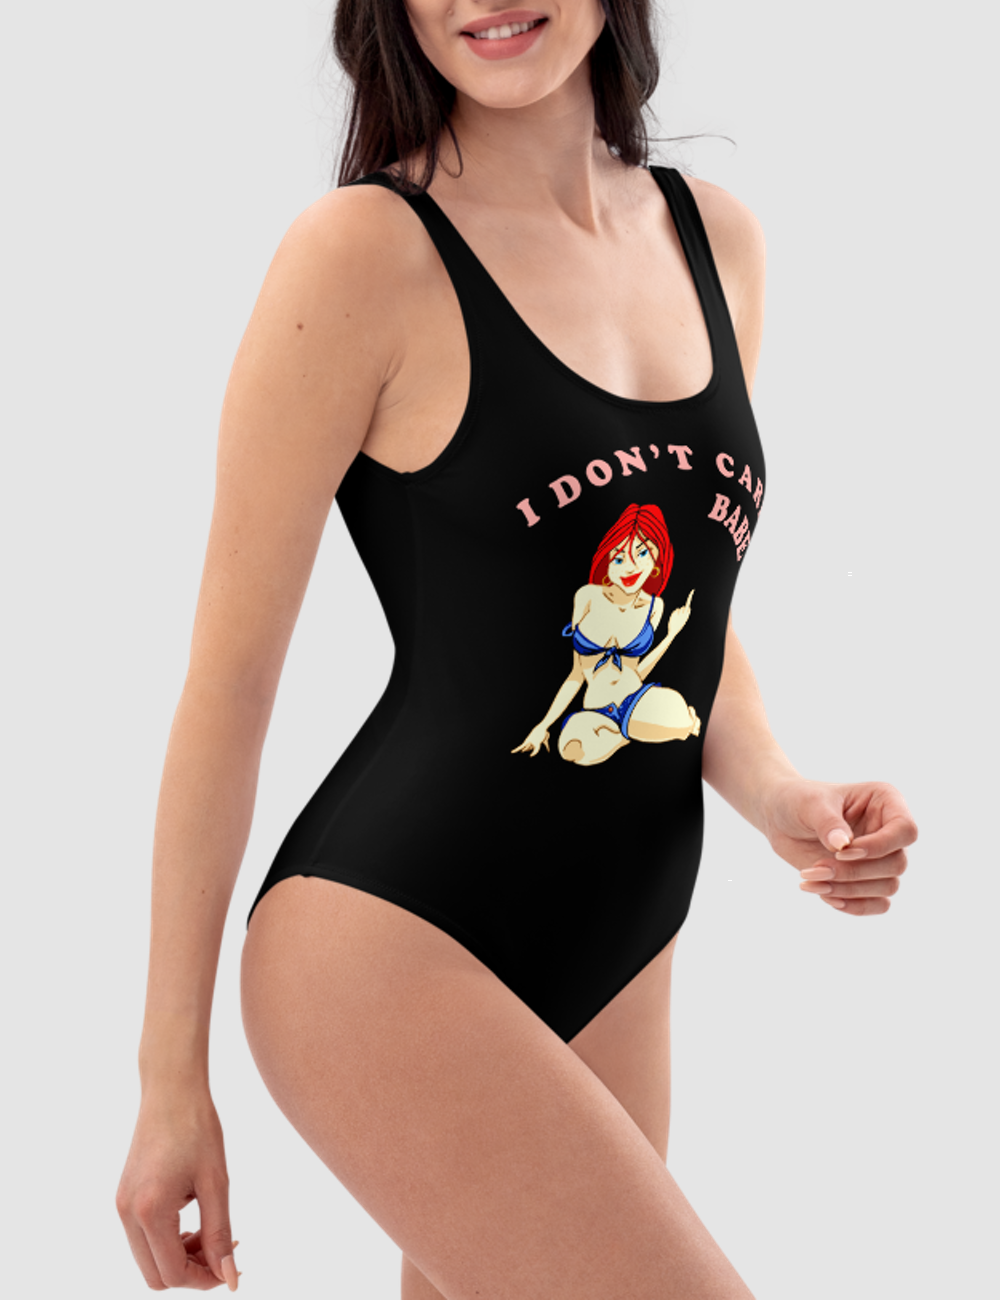 I Don't Care Babe | Women's One-Piece Swimsuit OniTakai